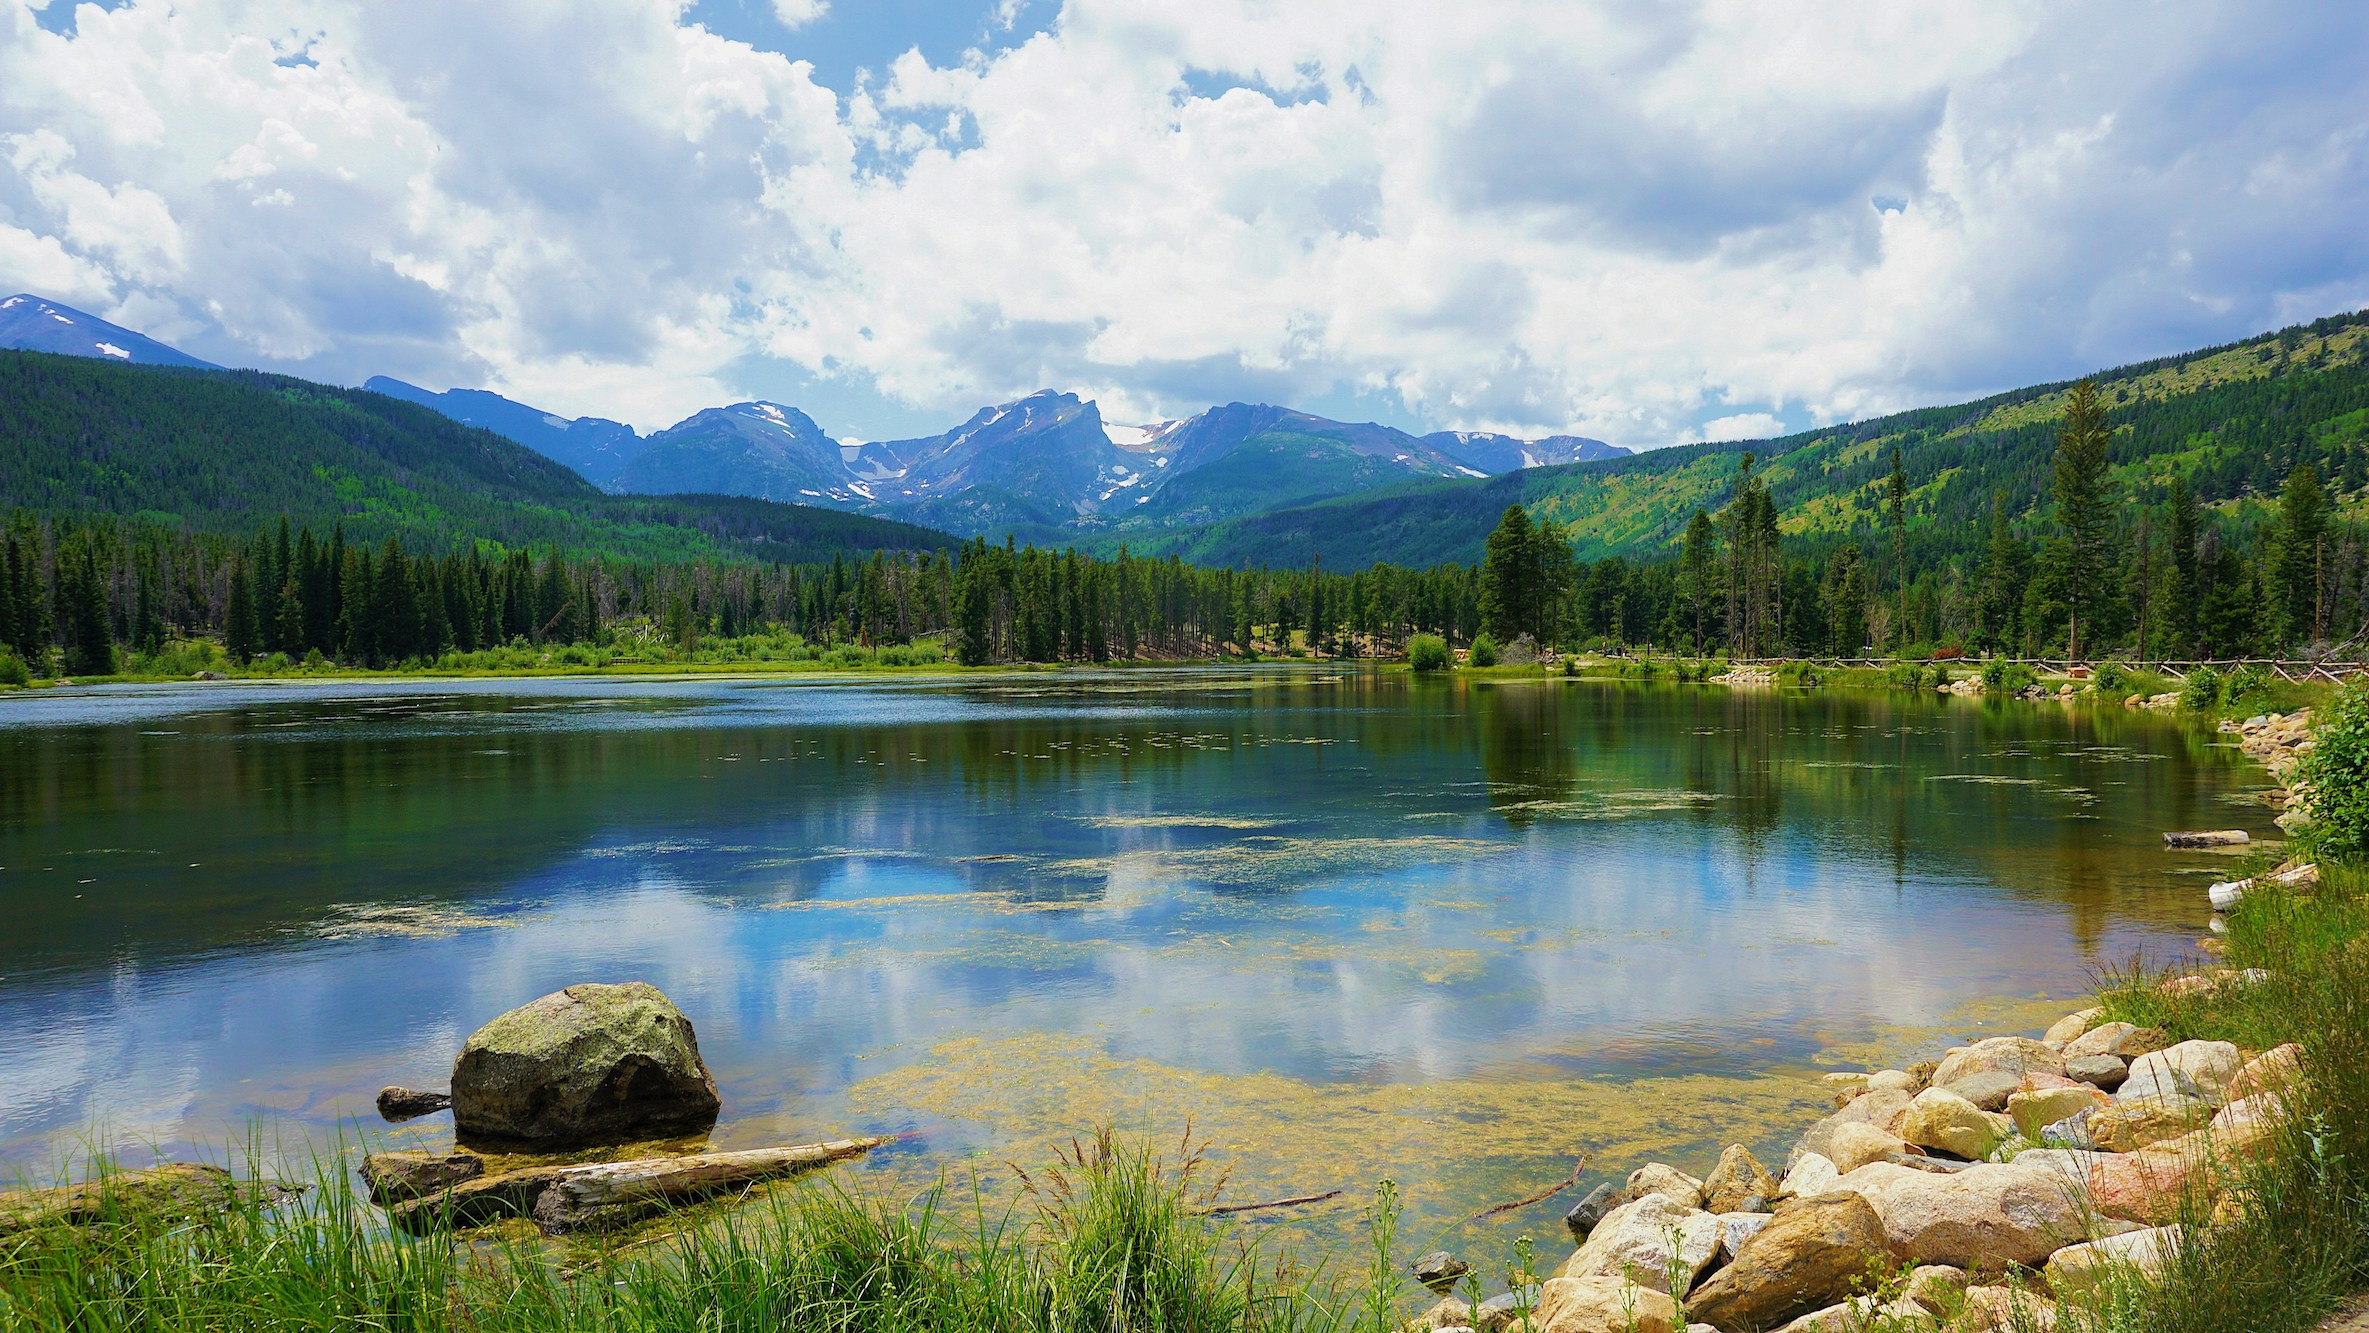 Take a Back-to-School Vacation to Estes Park